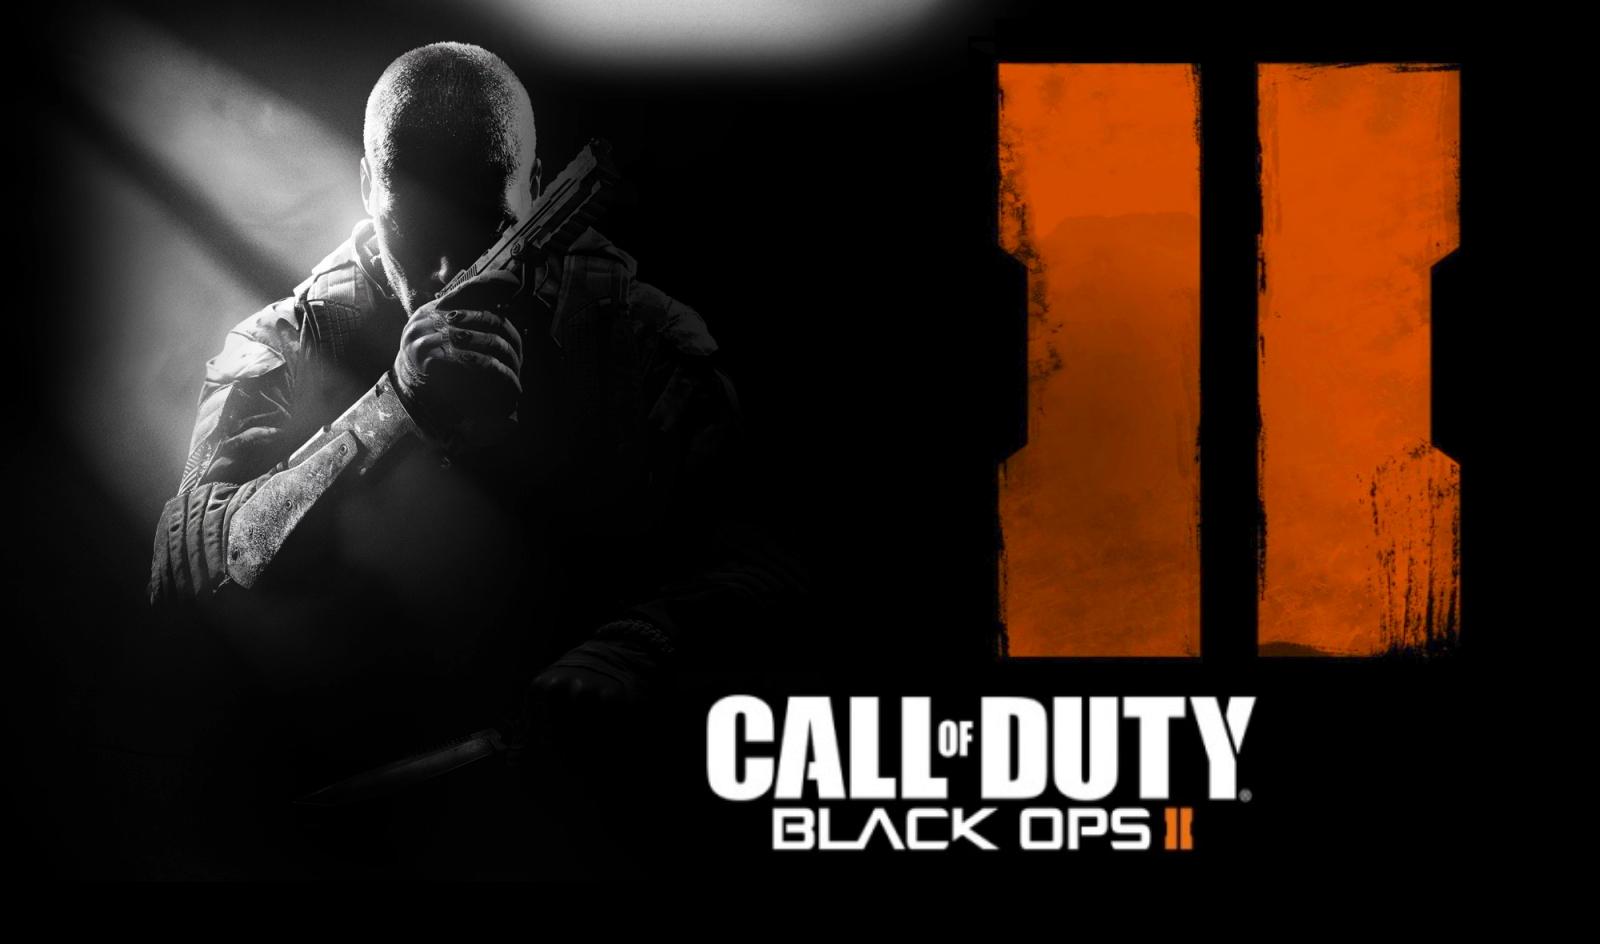 Black Ops 2 Animated Wallpaper. Triceratops Wallpaper, Black Ops 2 Wallpaper and Laptops Desktop Wallpaper Magenta